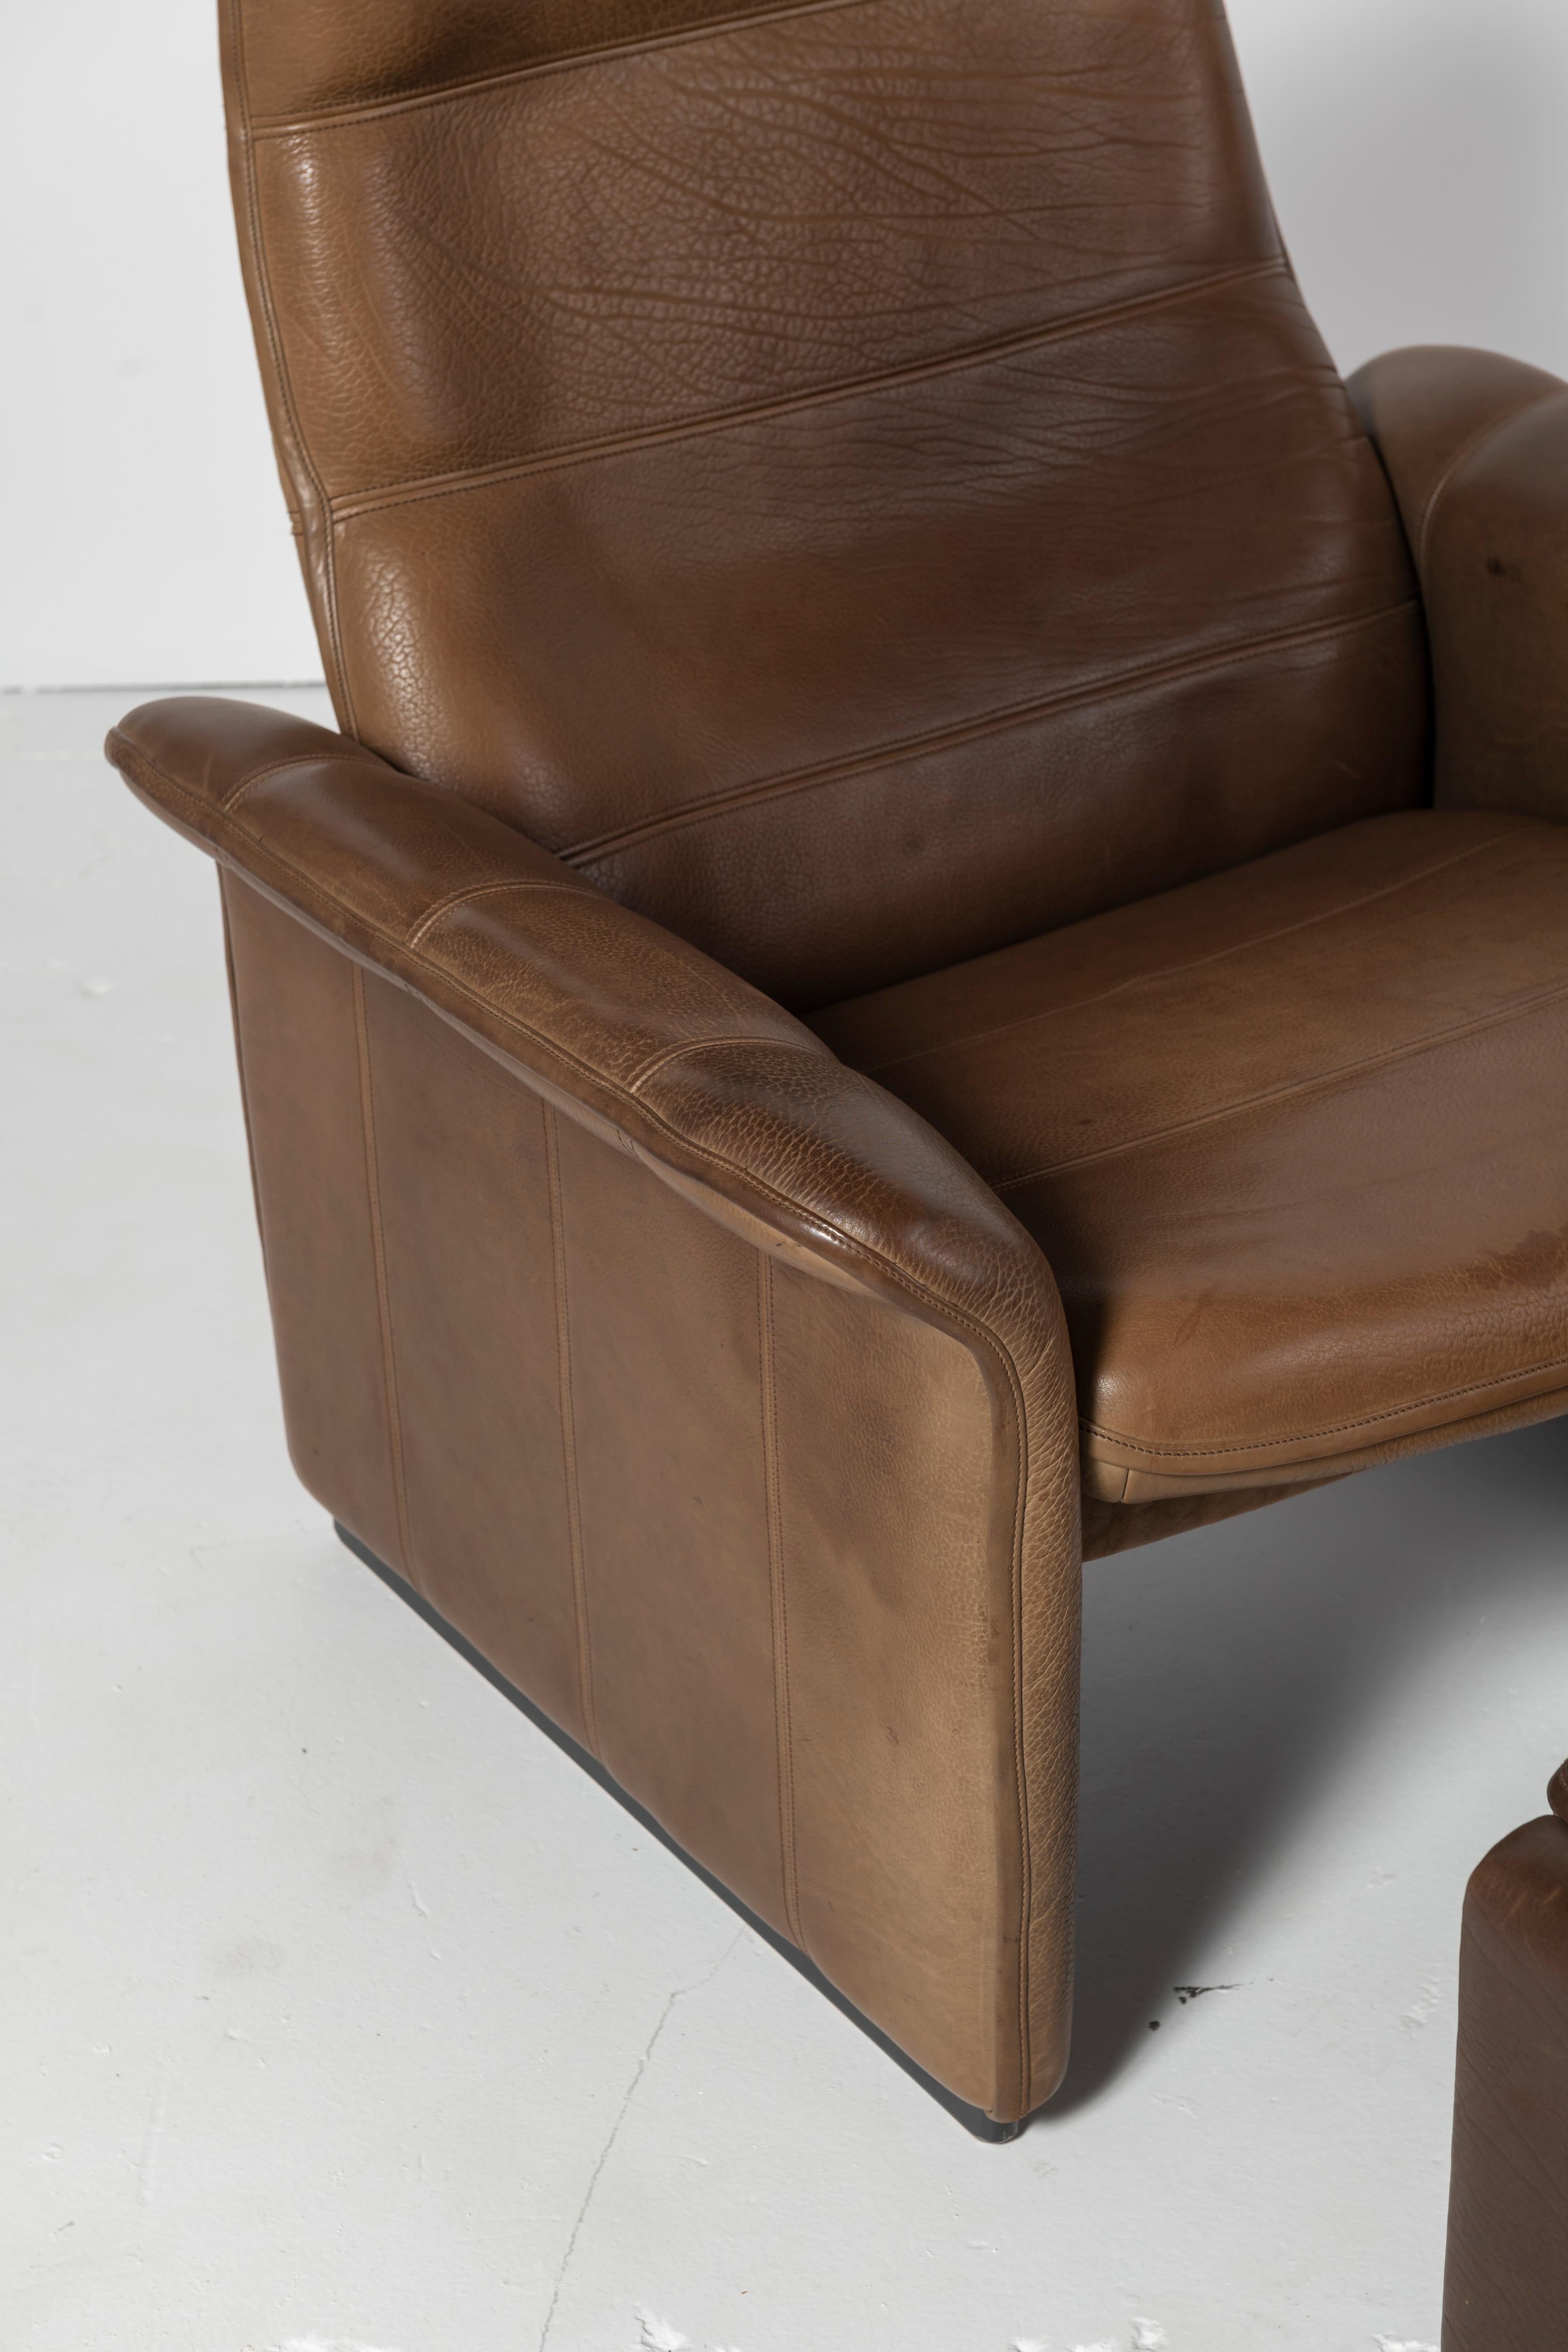 This De Sede lounge chair and ottoman is in very good condition and has a beautiful patina on the tobacco colored leather. The chair reclines for additional functionality. Modern comfort and great design make these pieces highly collectible.